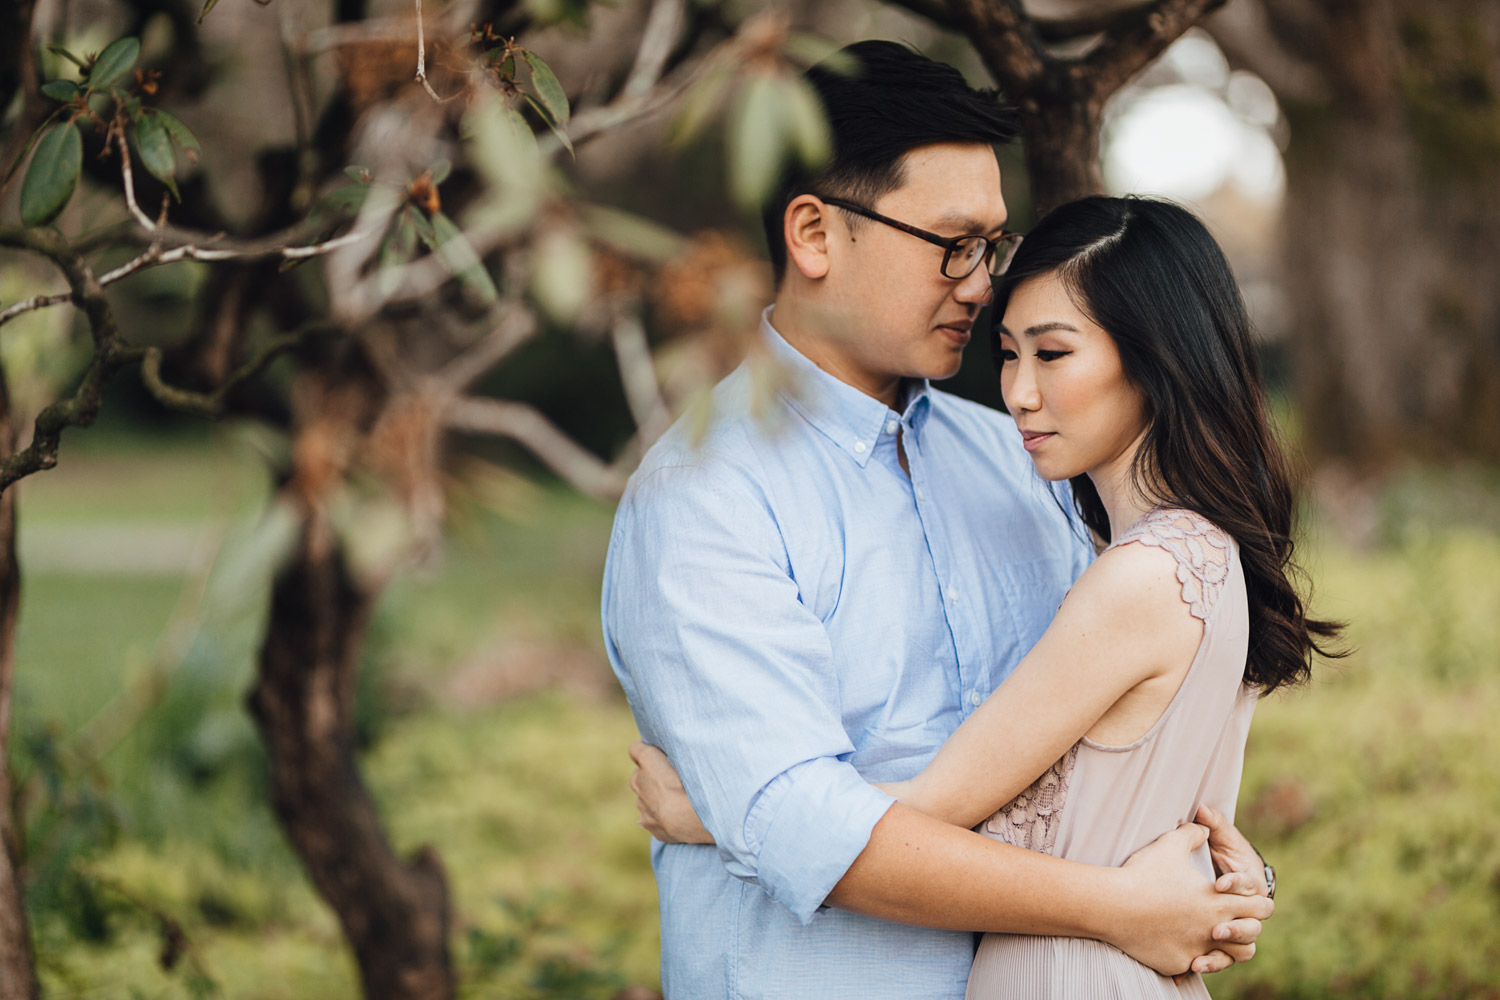 vancouver cherry blossom engagement photography in stanley park